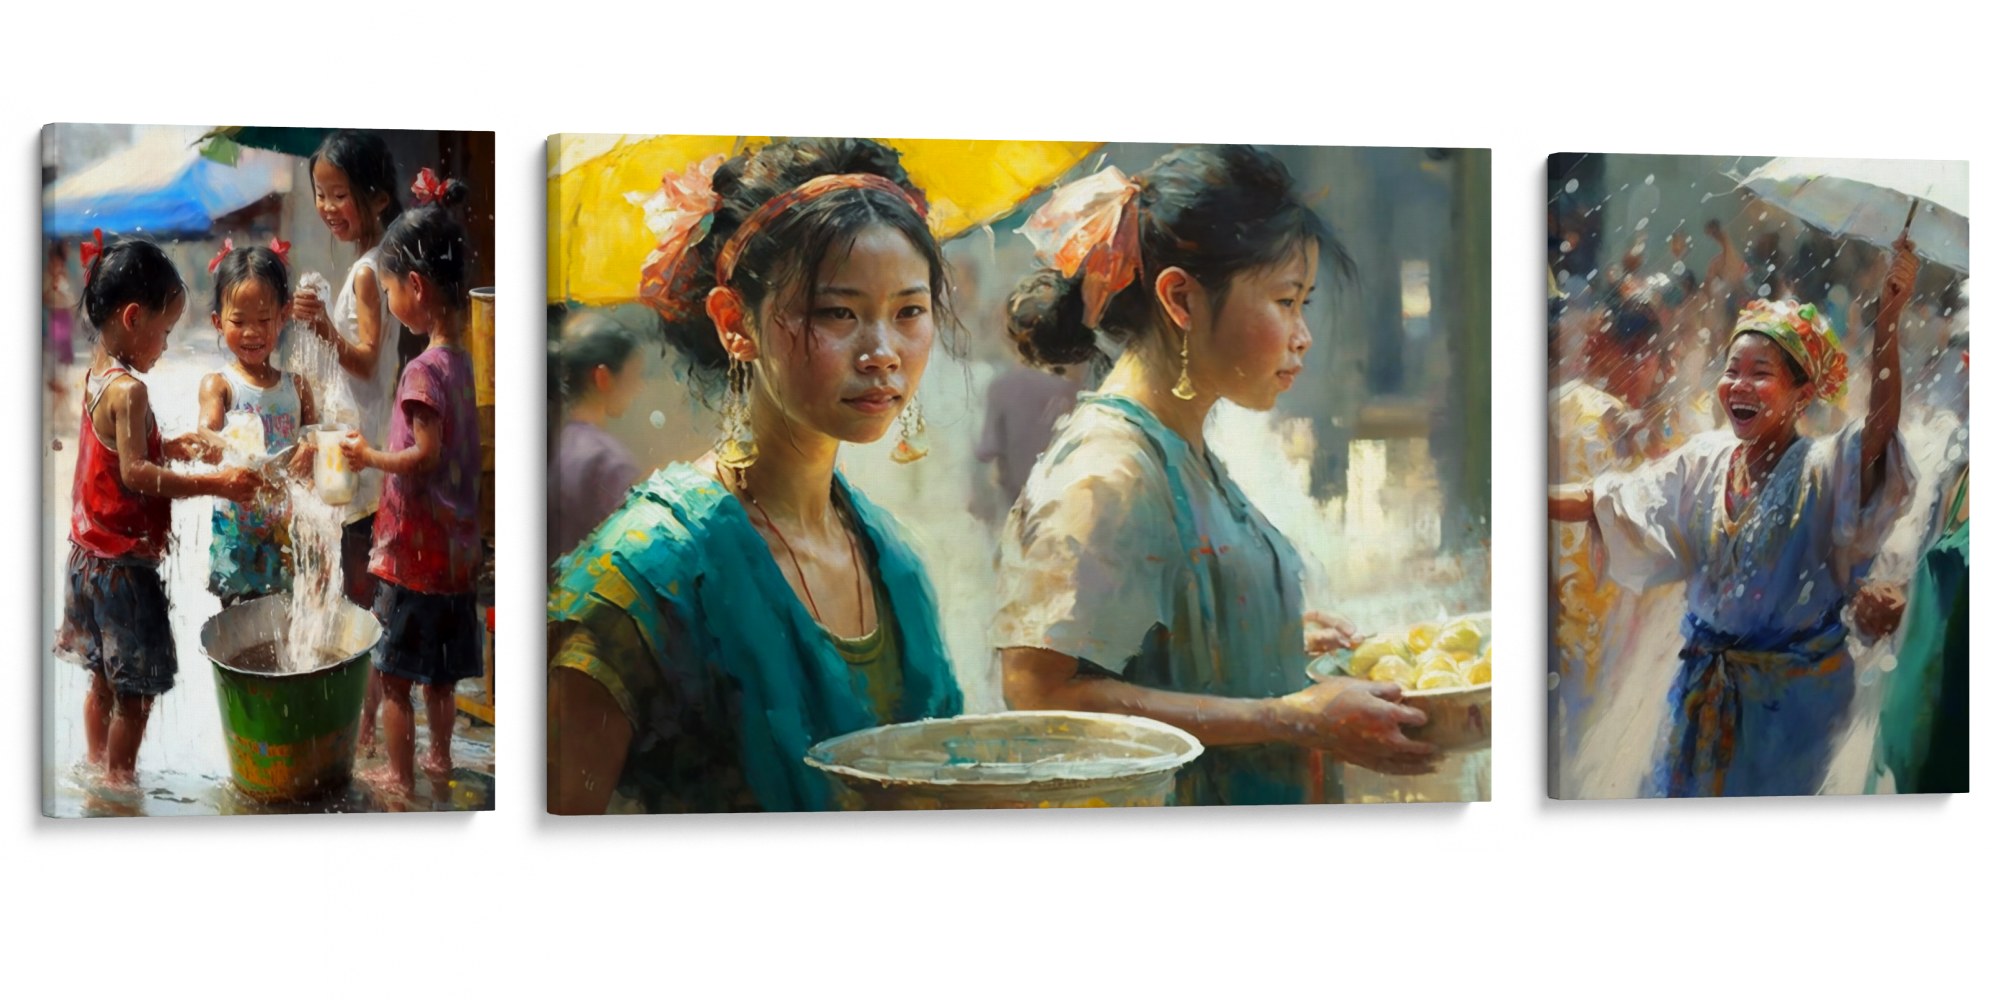 SONGKRAN FEST Canvas Collection - Dive into Thailand’s Songkran festival with this original triptych.